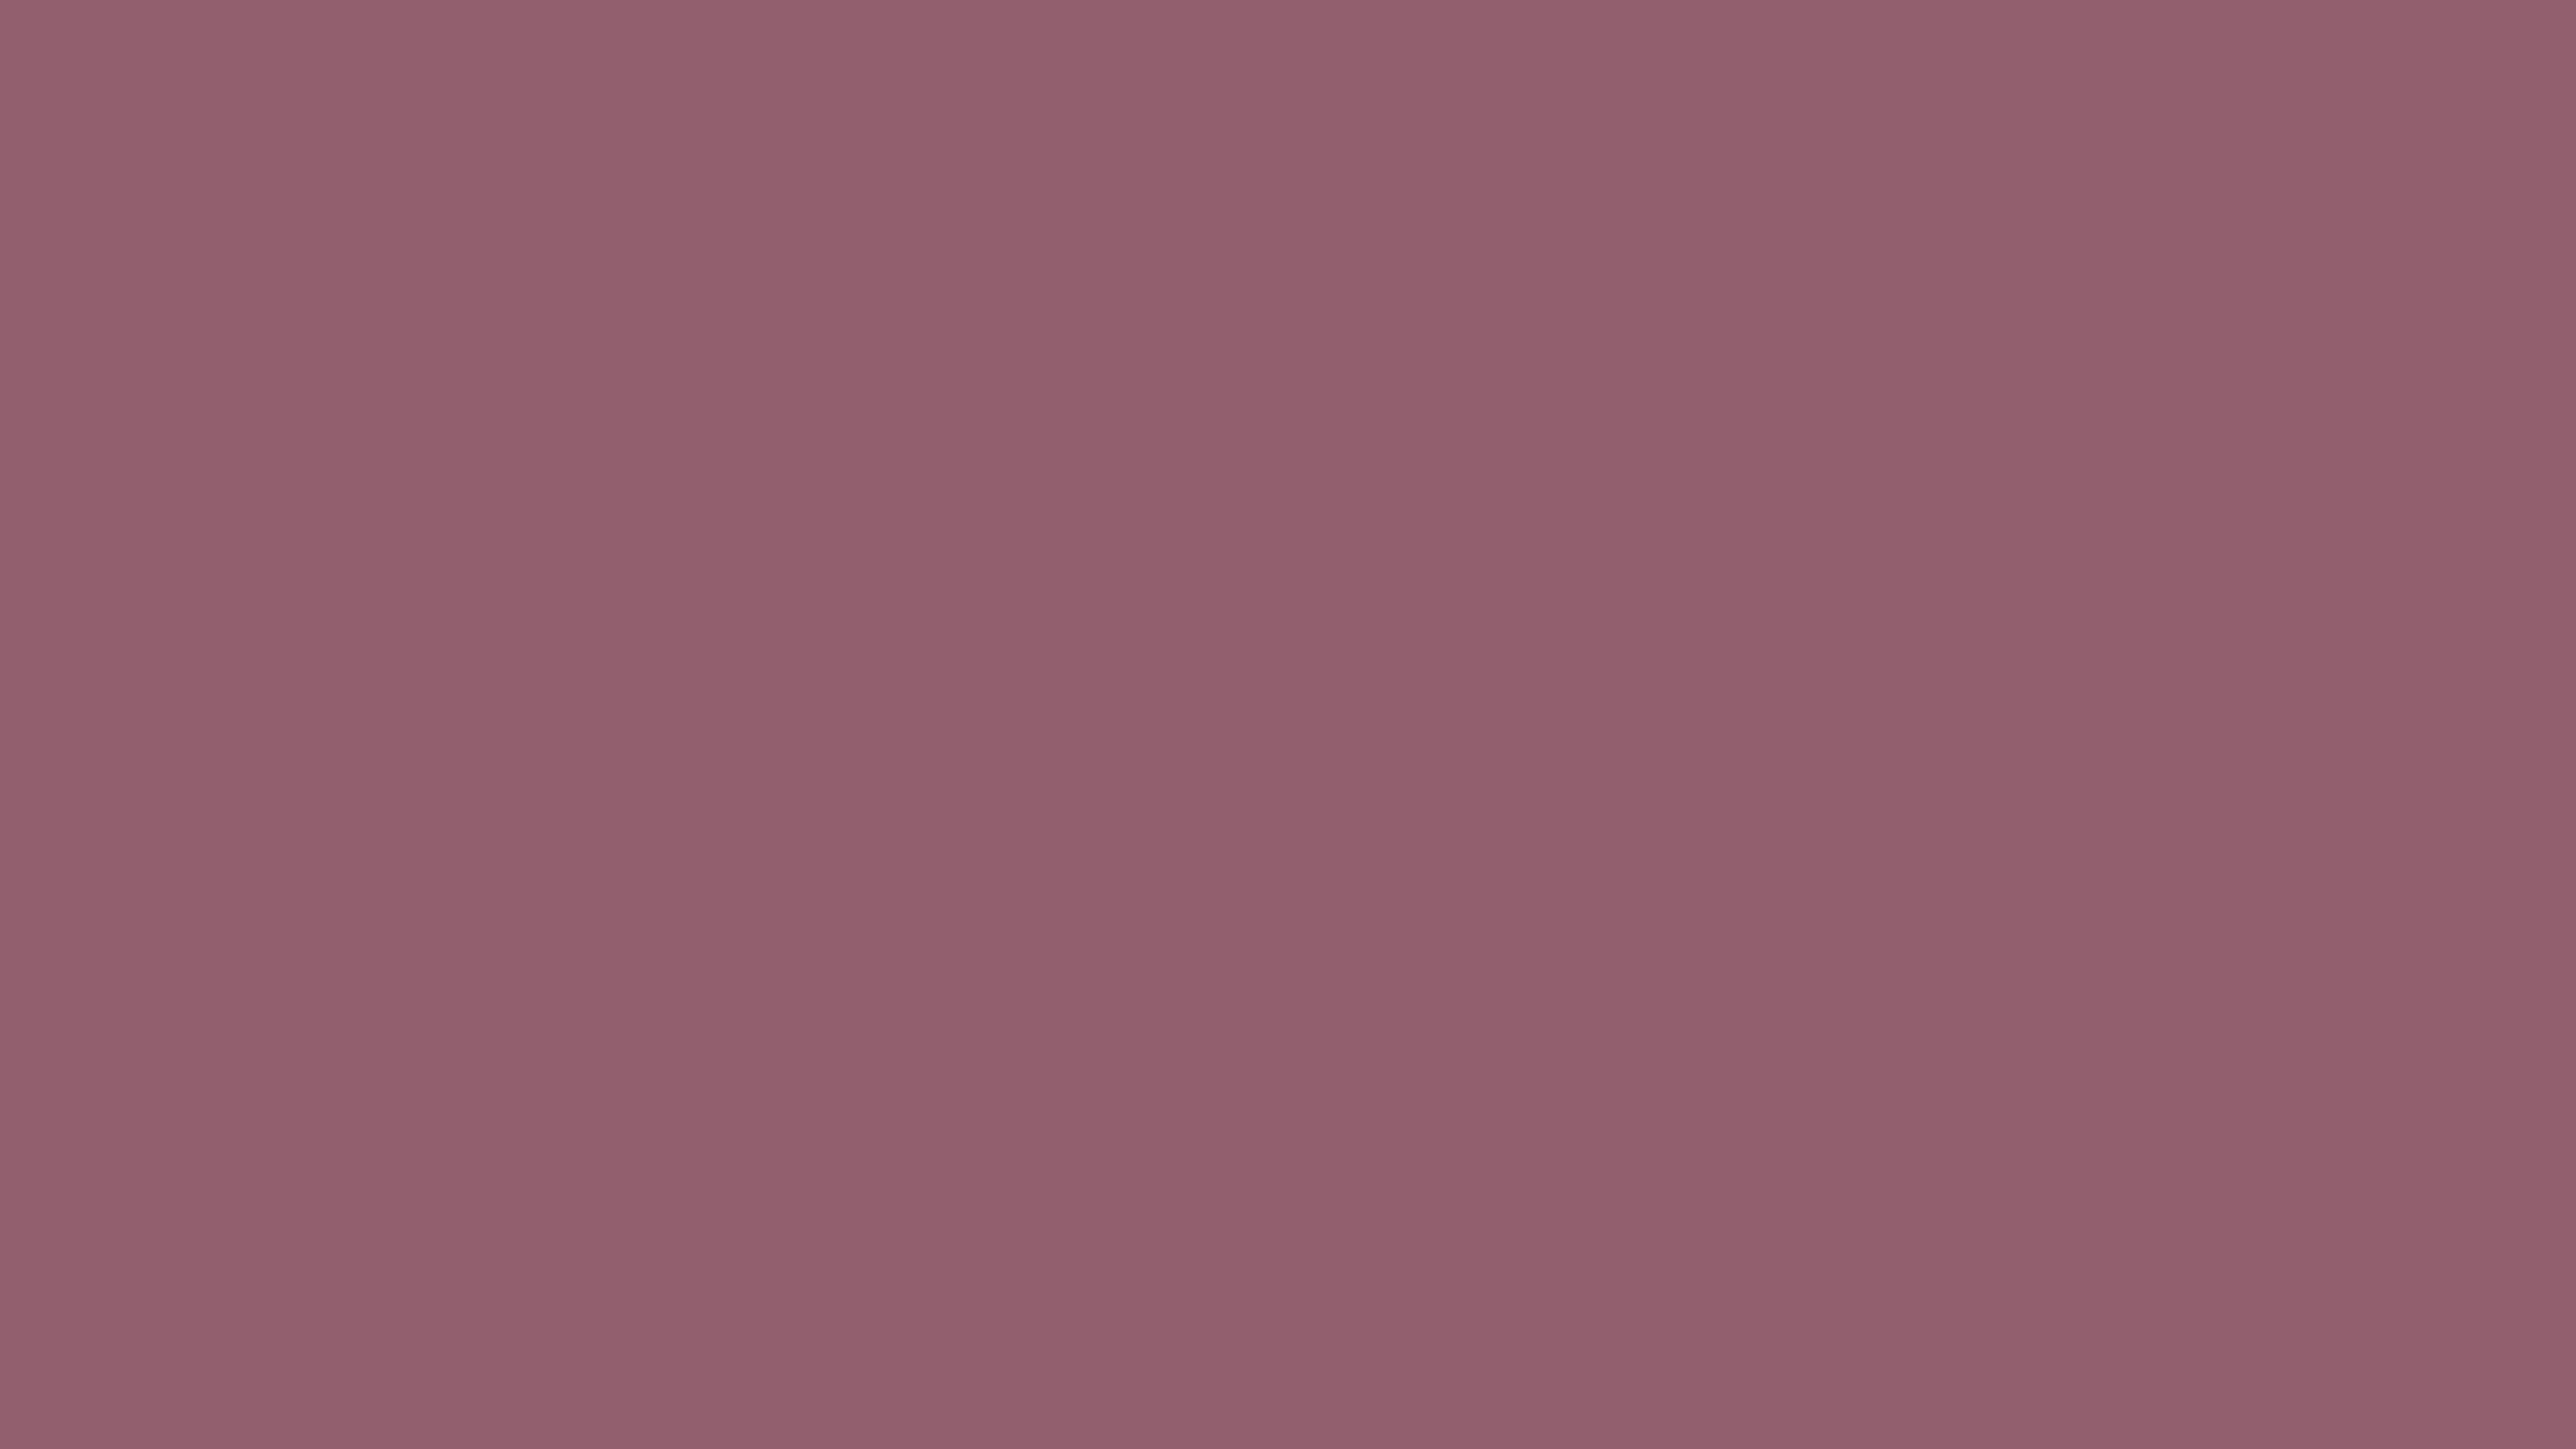 5120x2880 Mauve Taupe Solid Color Background